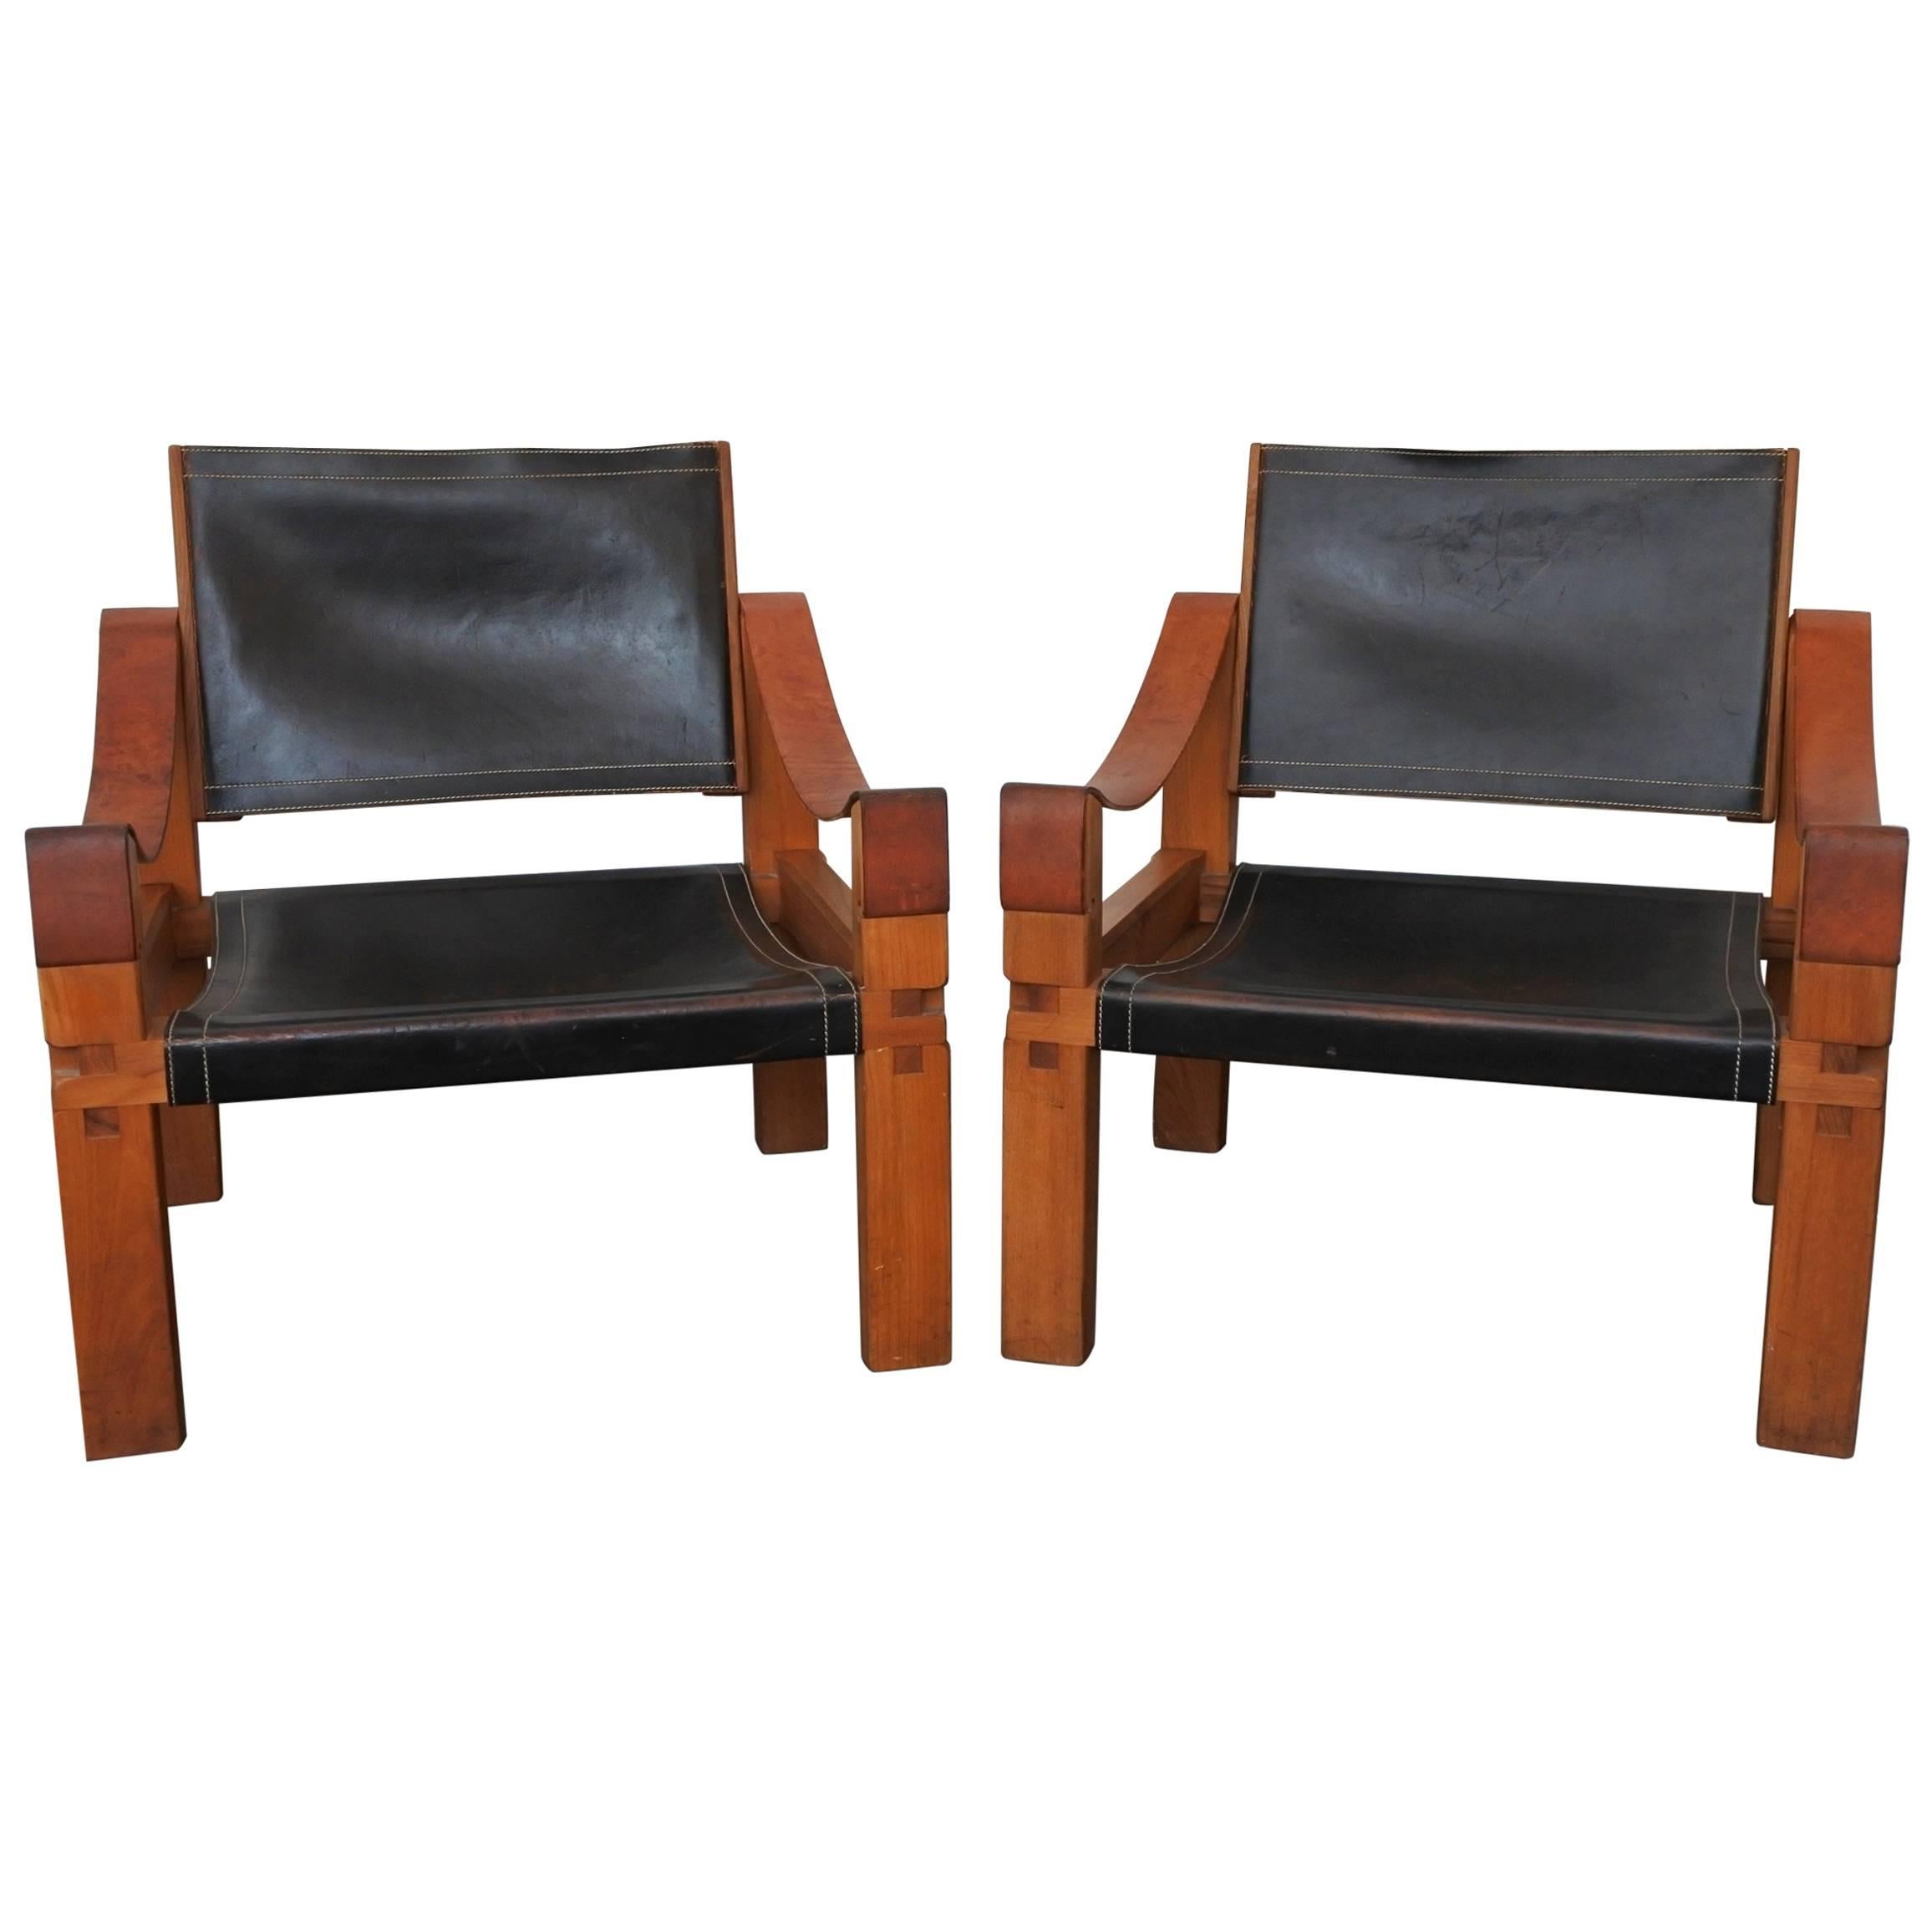 Pierre Chapo Pair of S10 Lounge Chairs in Elm Wood and Leather, France, 1970s